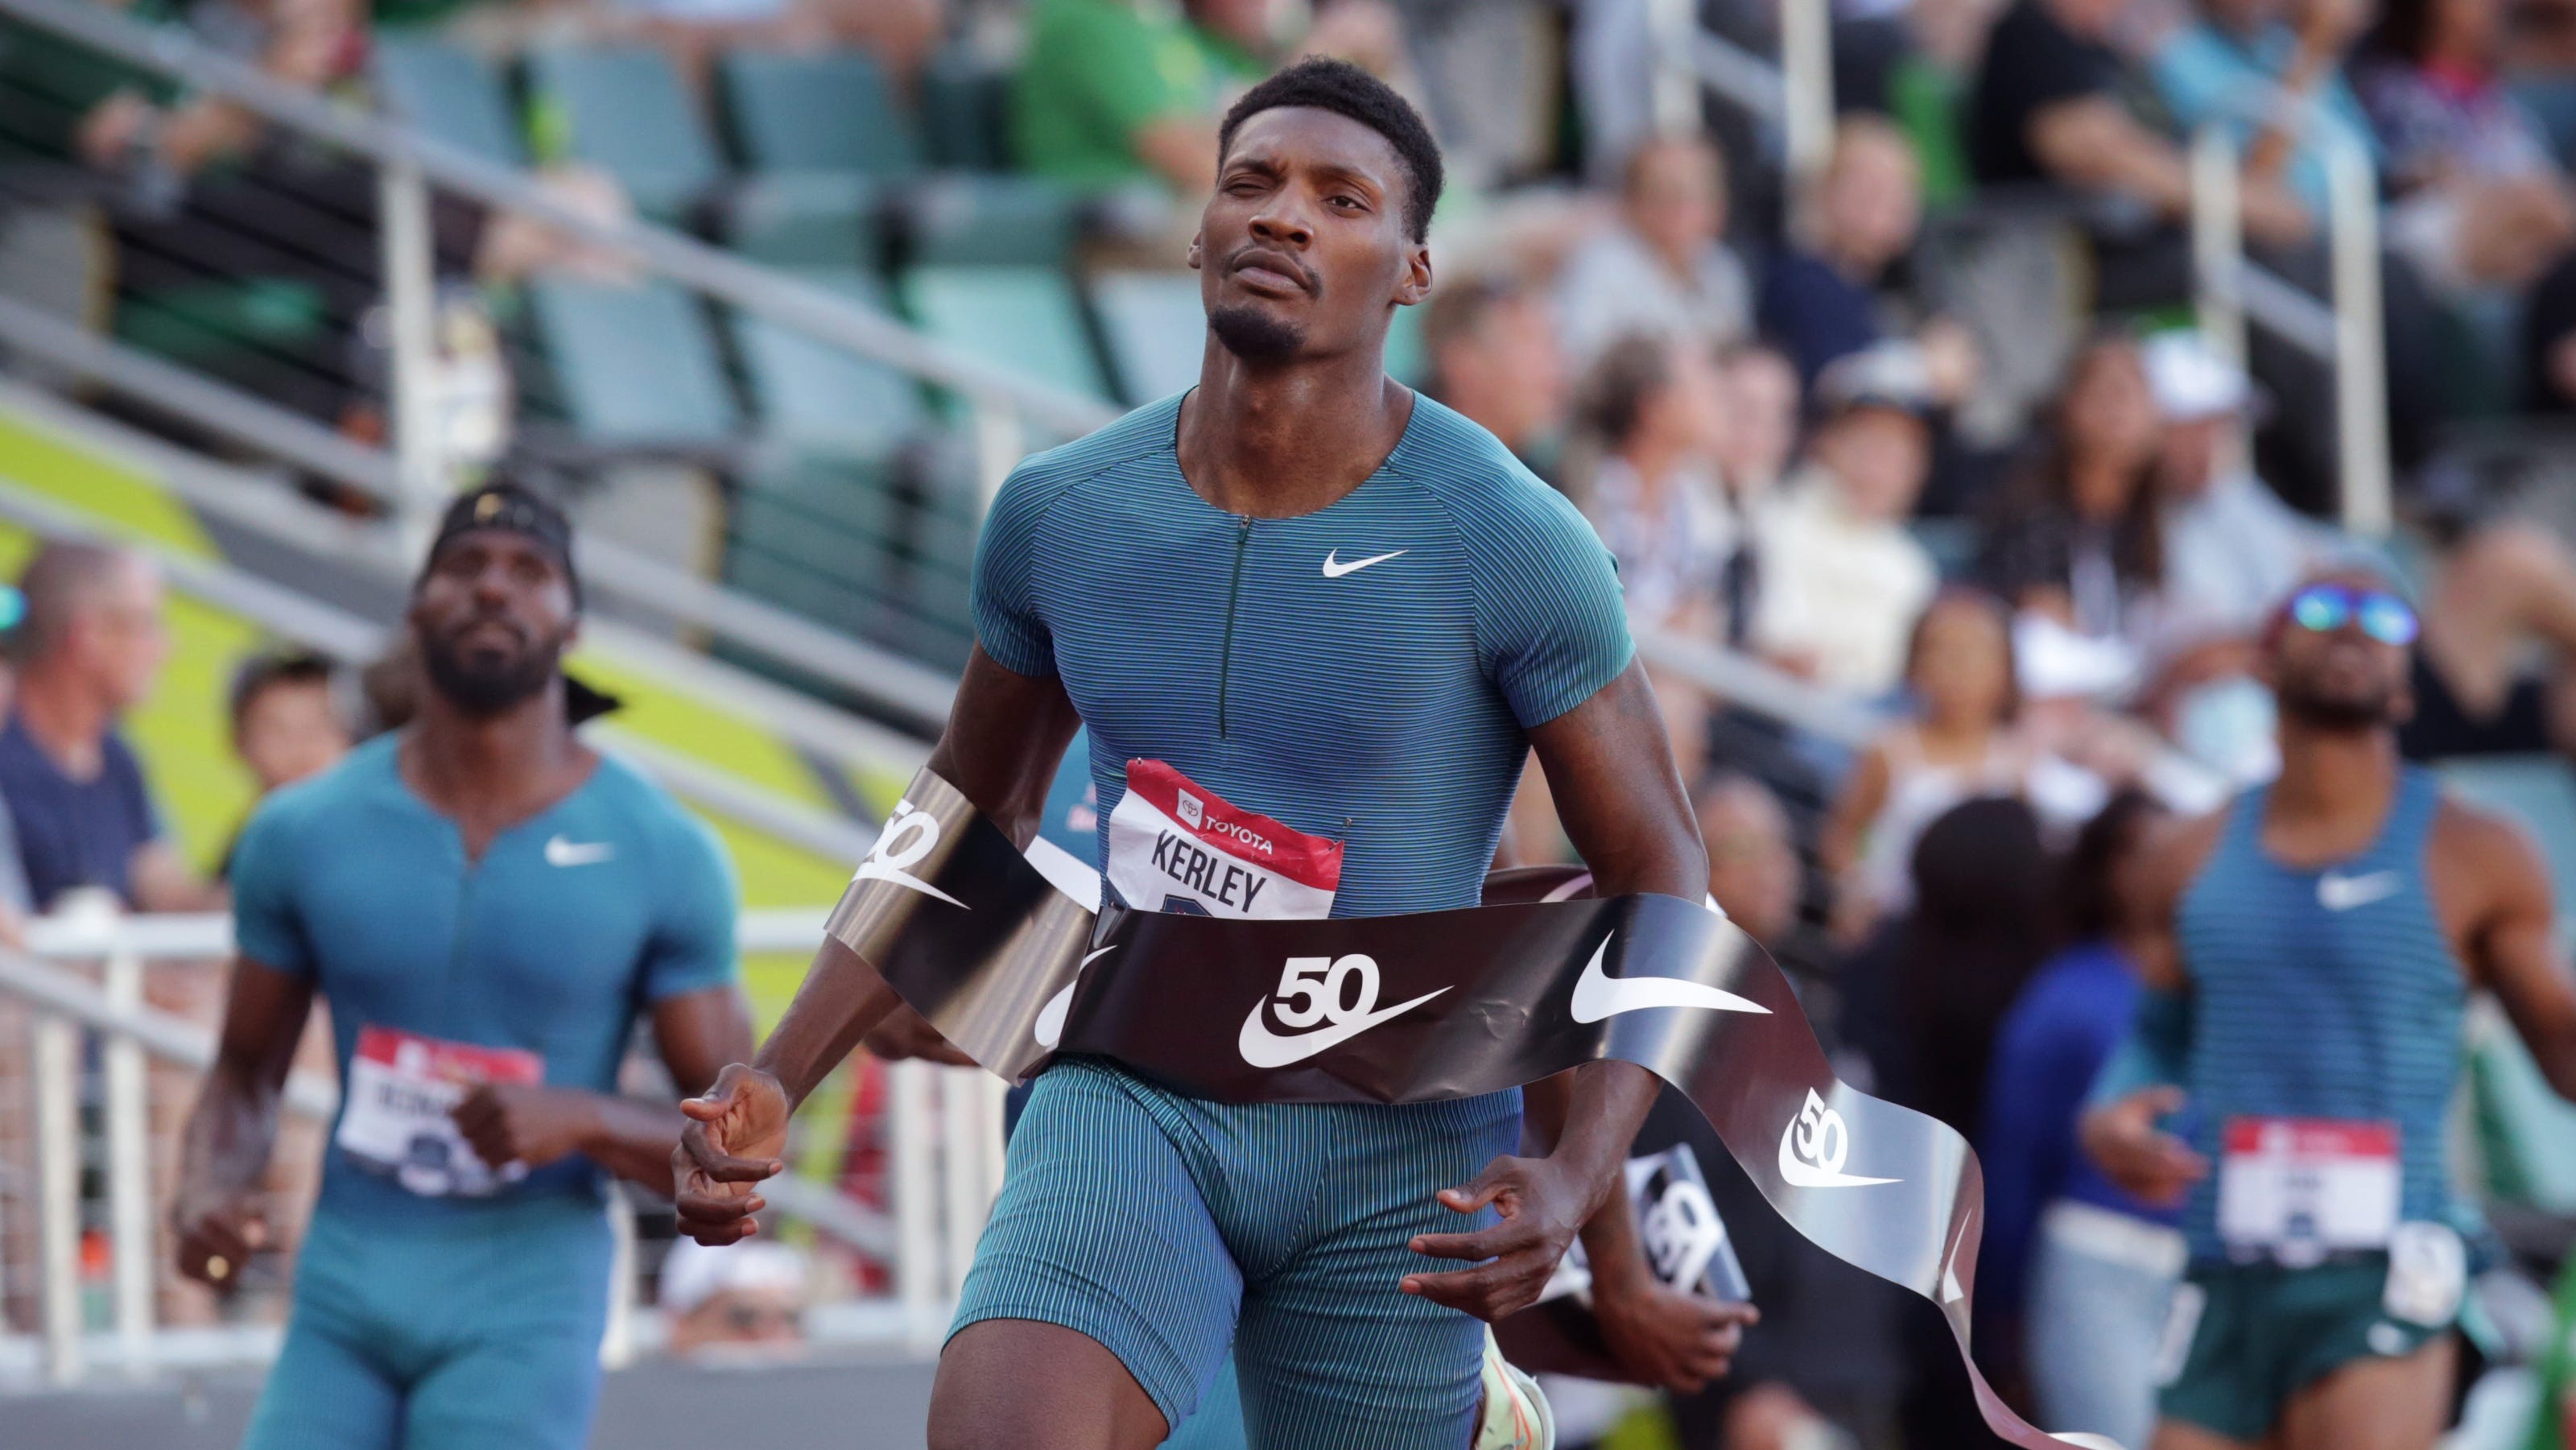 10 storylines to watch at 2022 track and field world championships